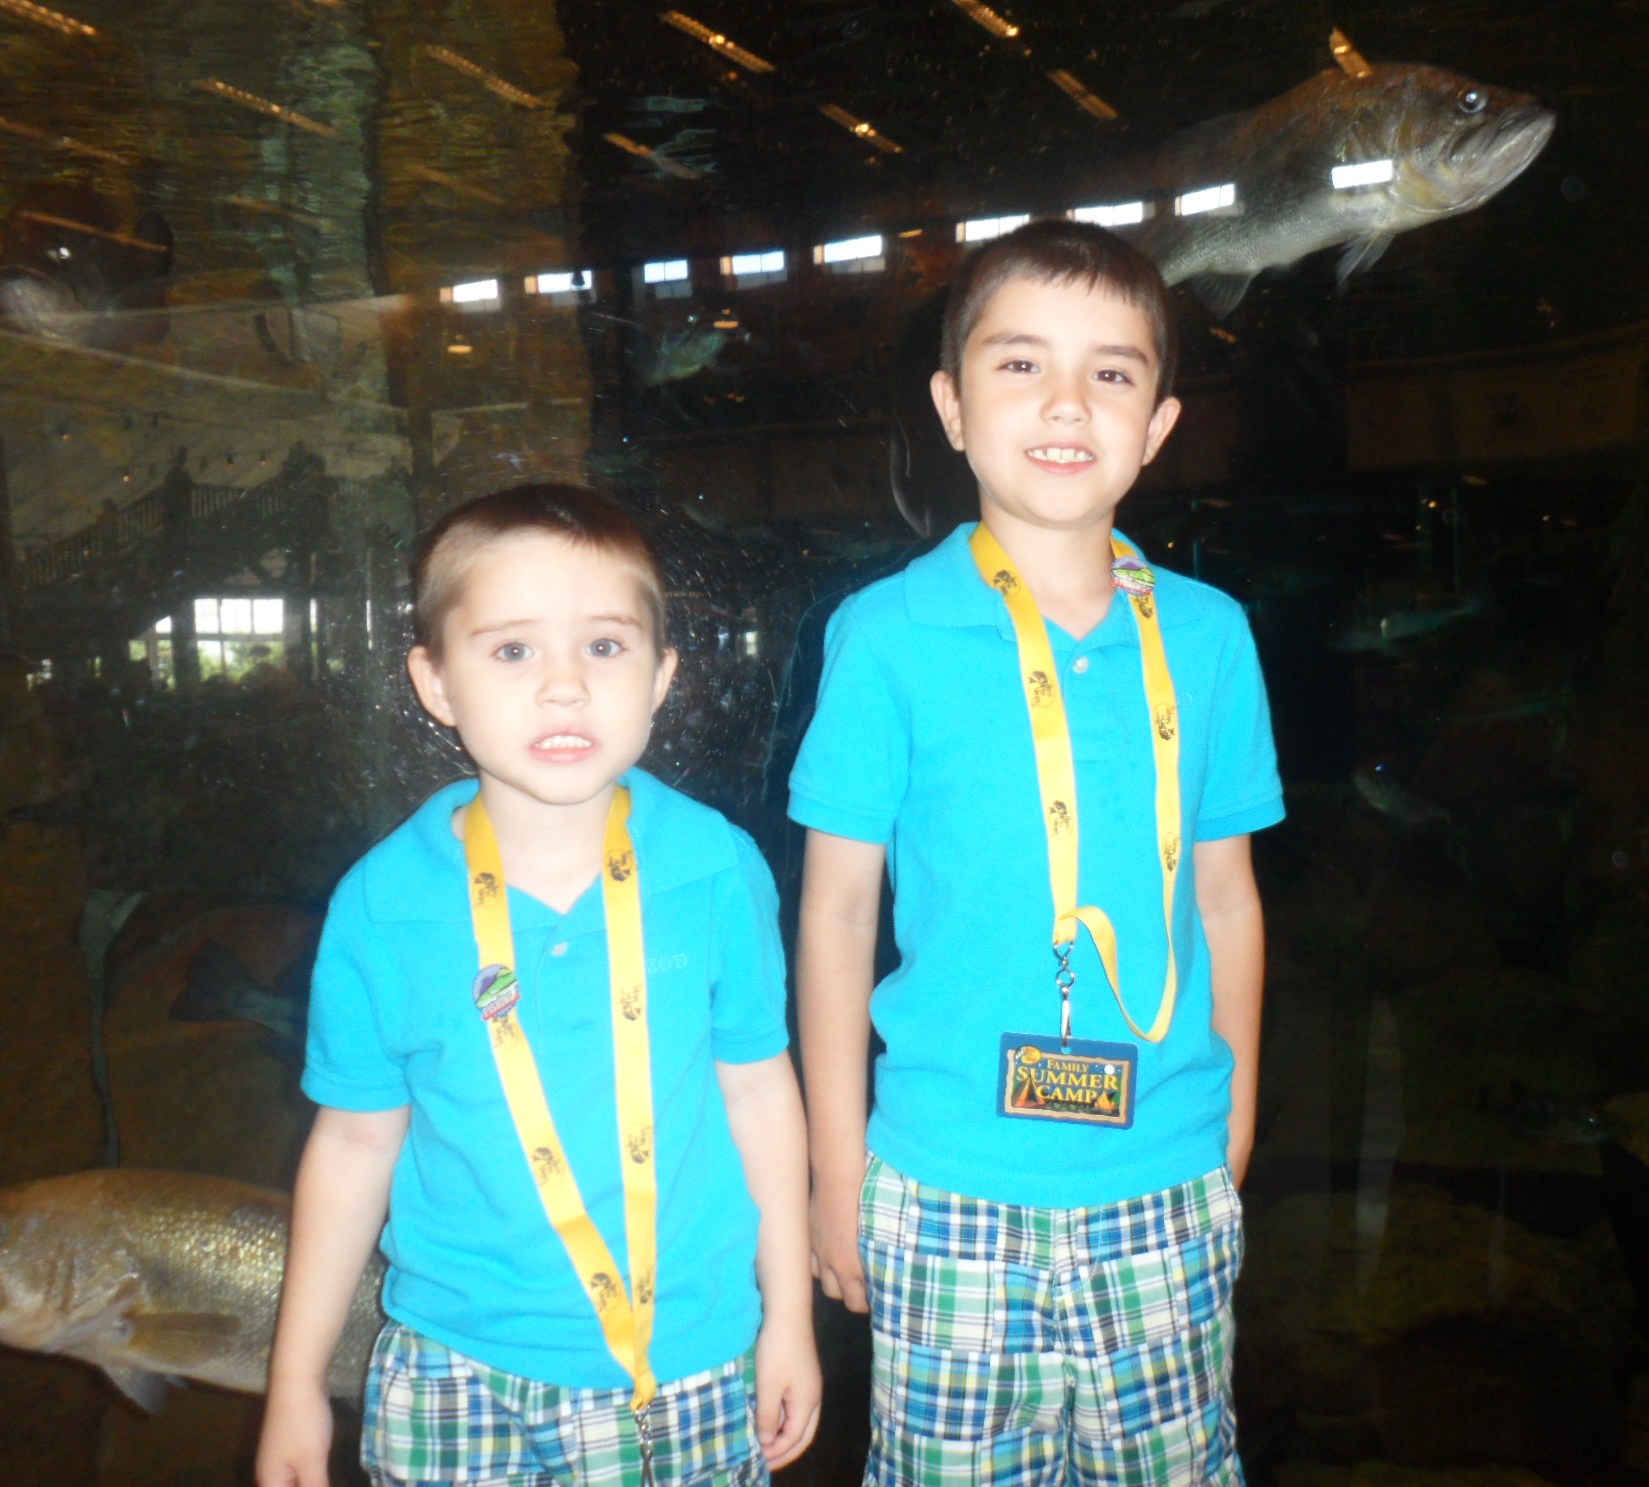 Here are the boys by the fish with their fishing pins on their lanyards.